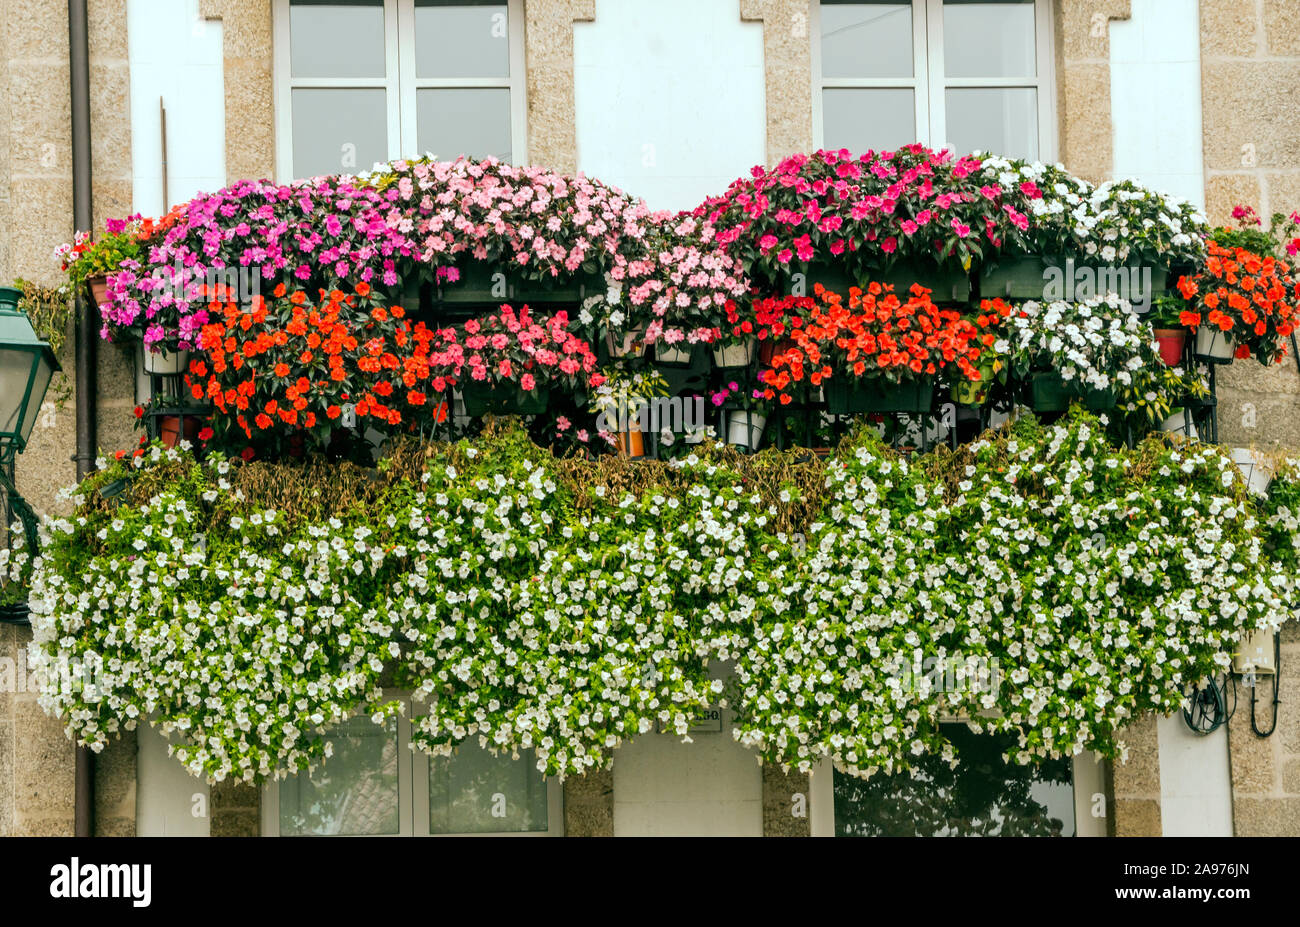 Windows with flowers in the balcony in a wall Stock Photo